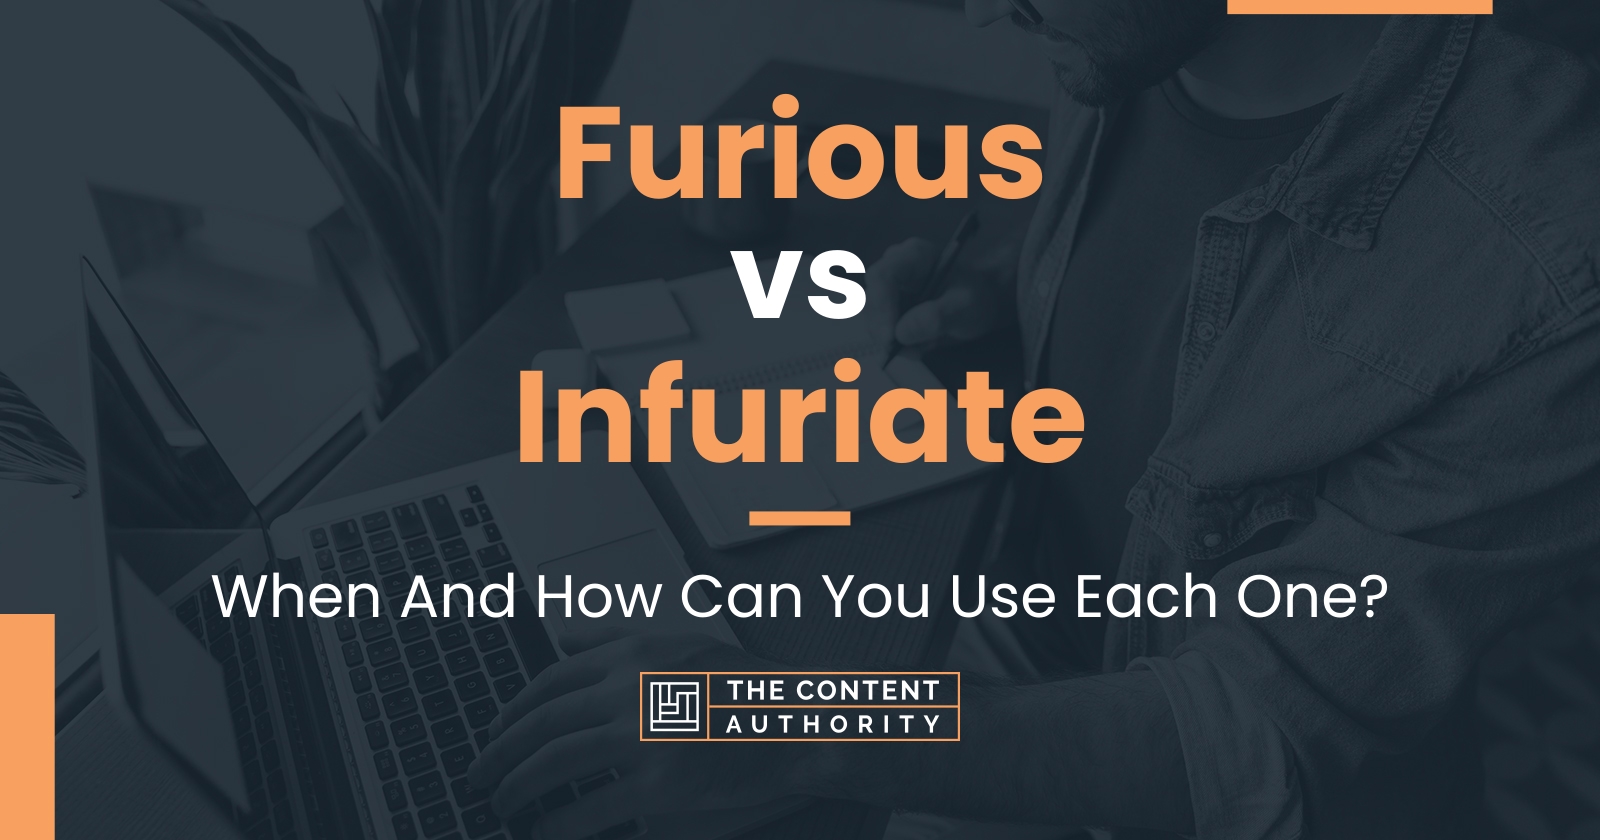 Furious vs Infuriate: When And How Can You Use Each One?